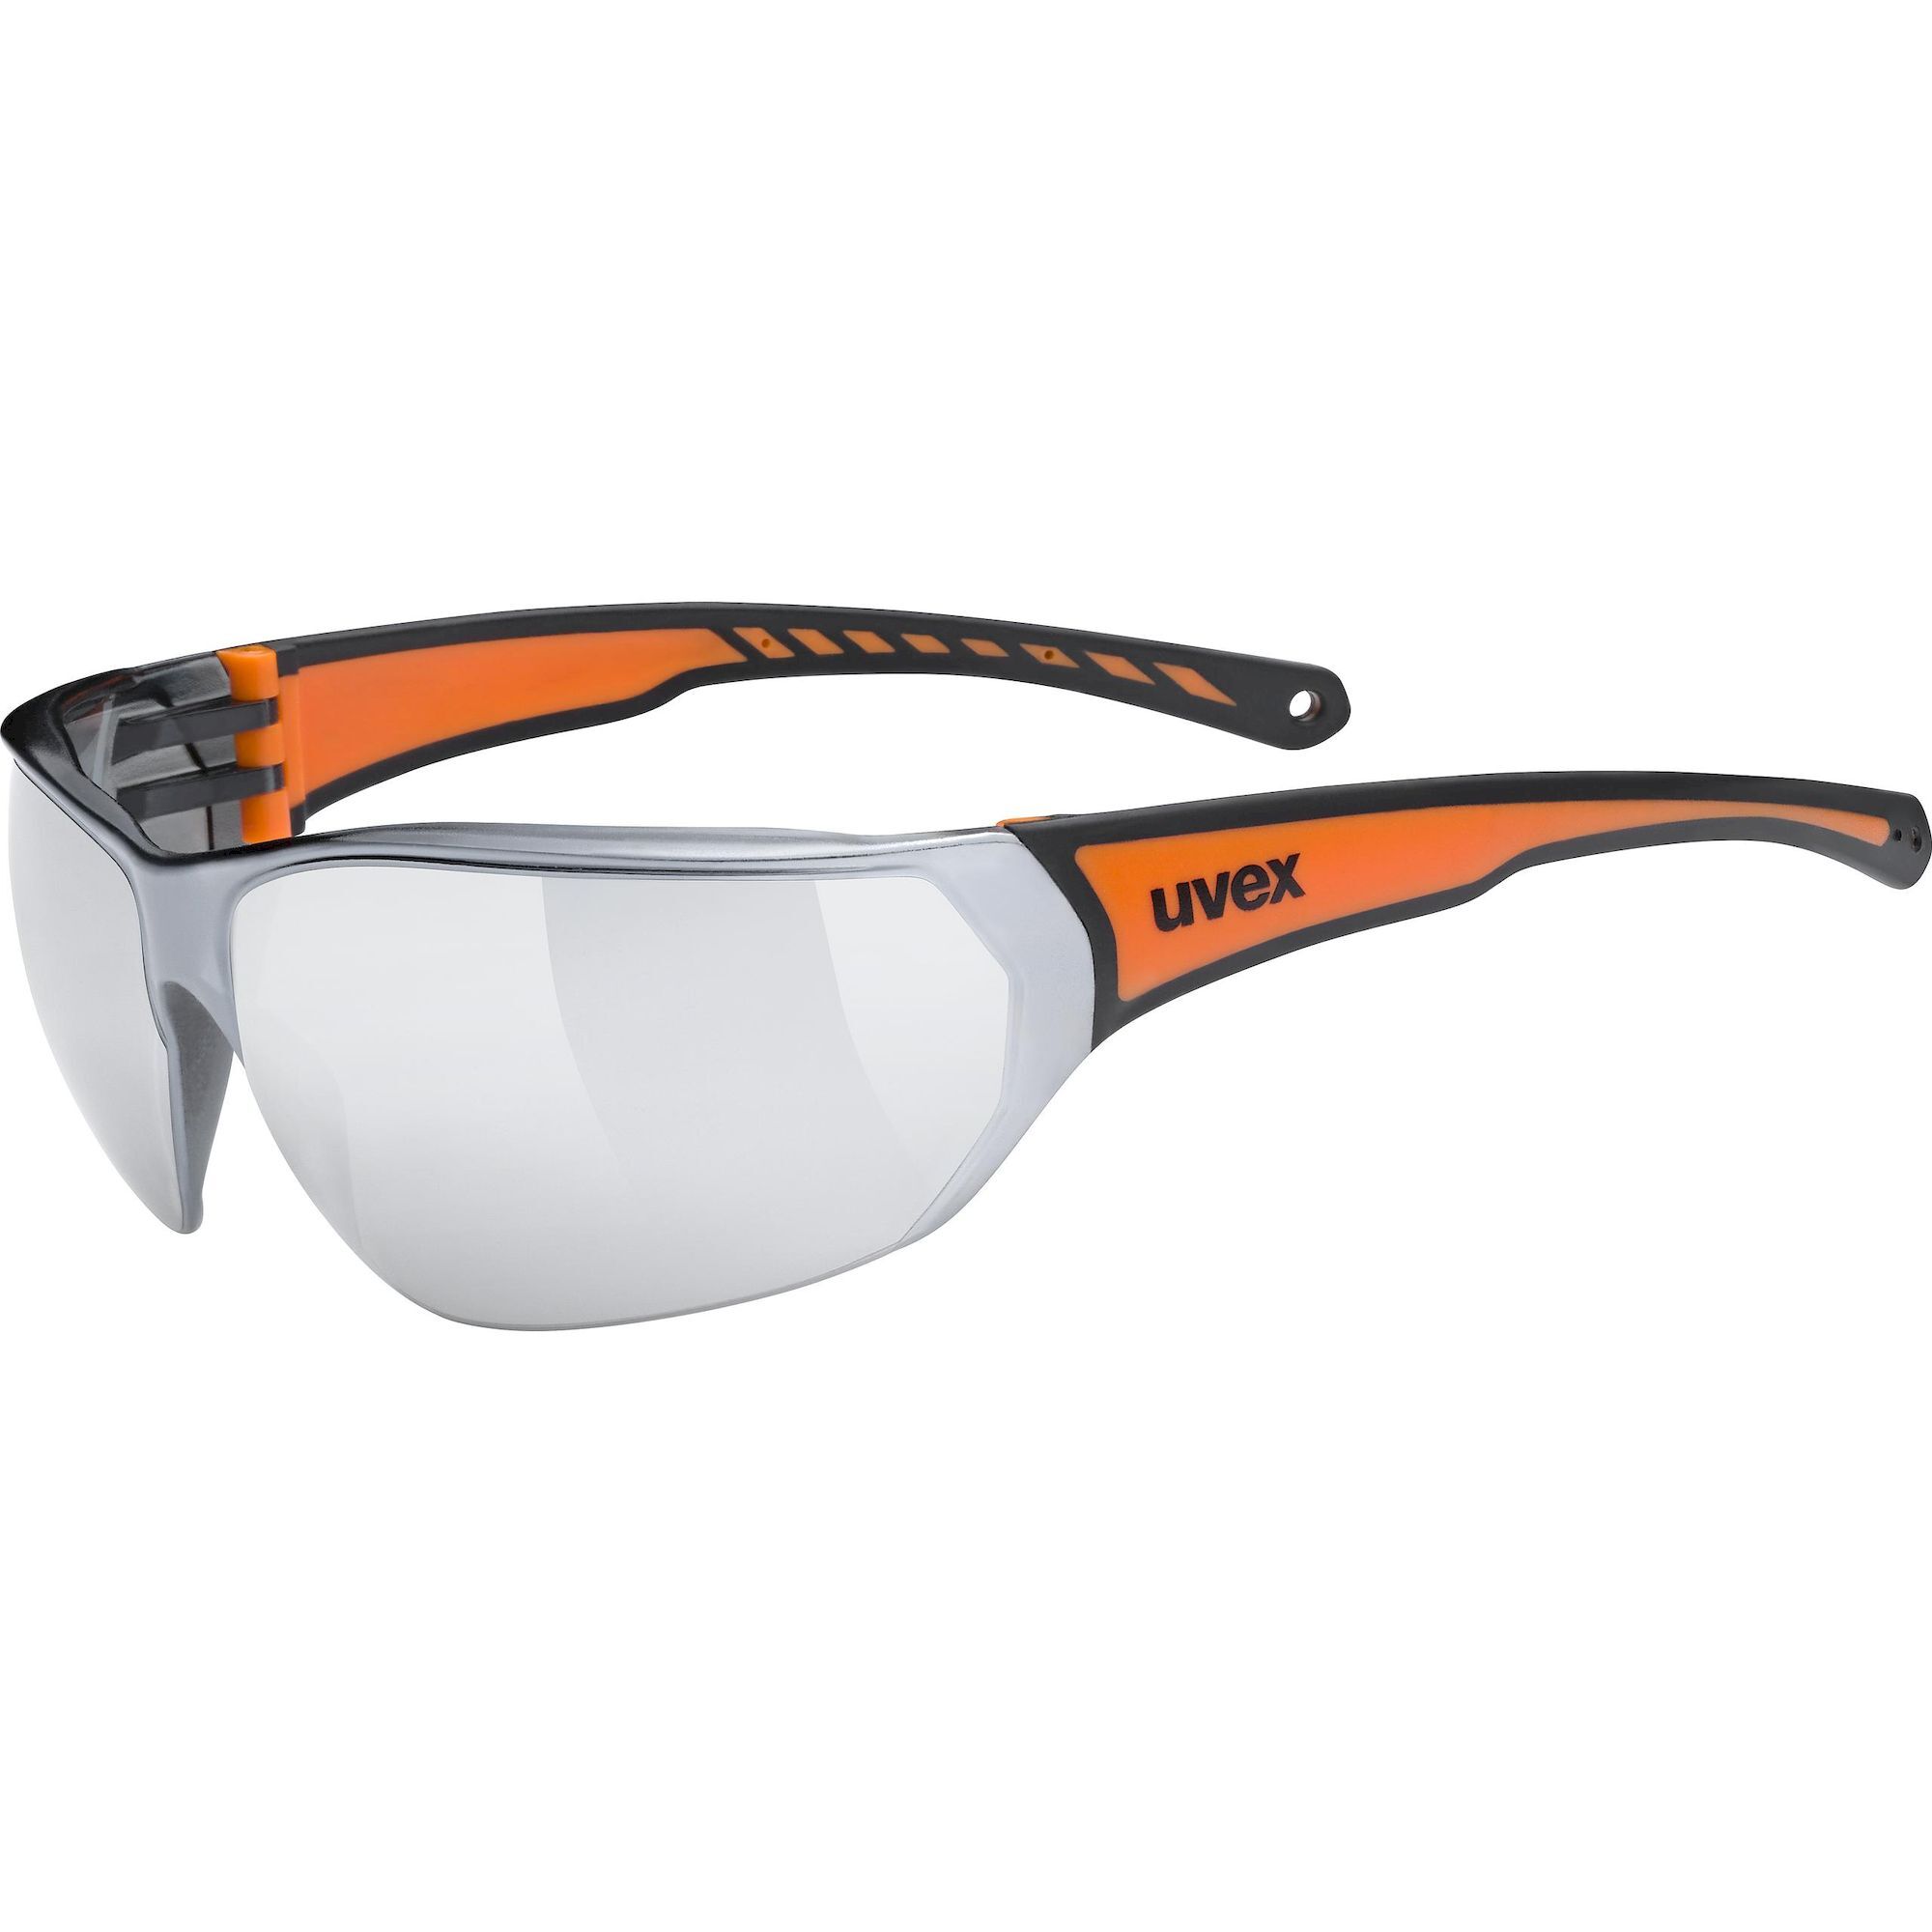 Uvex Sportstyle 204 - Cycling sunglasses